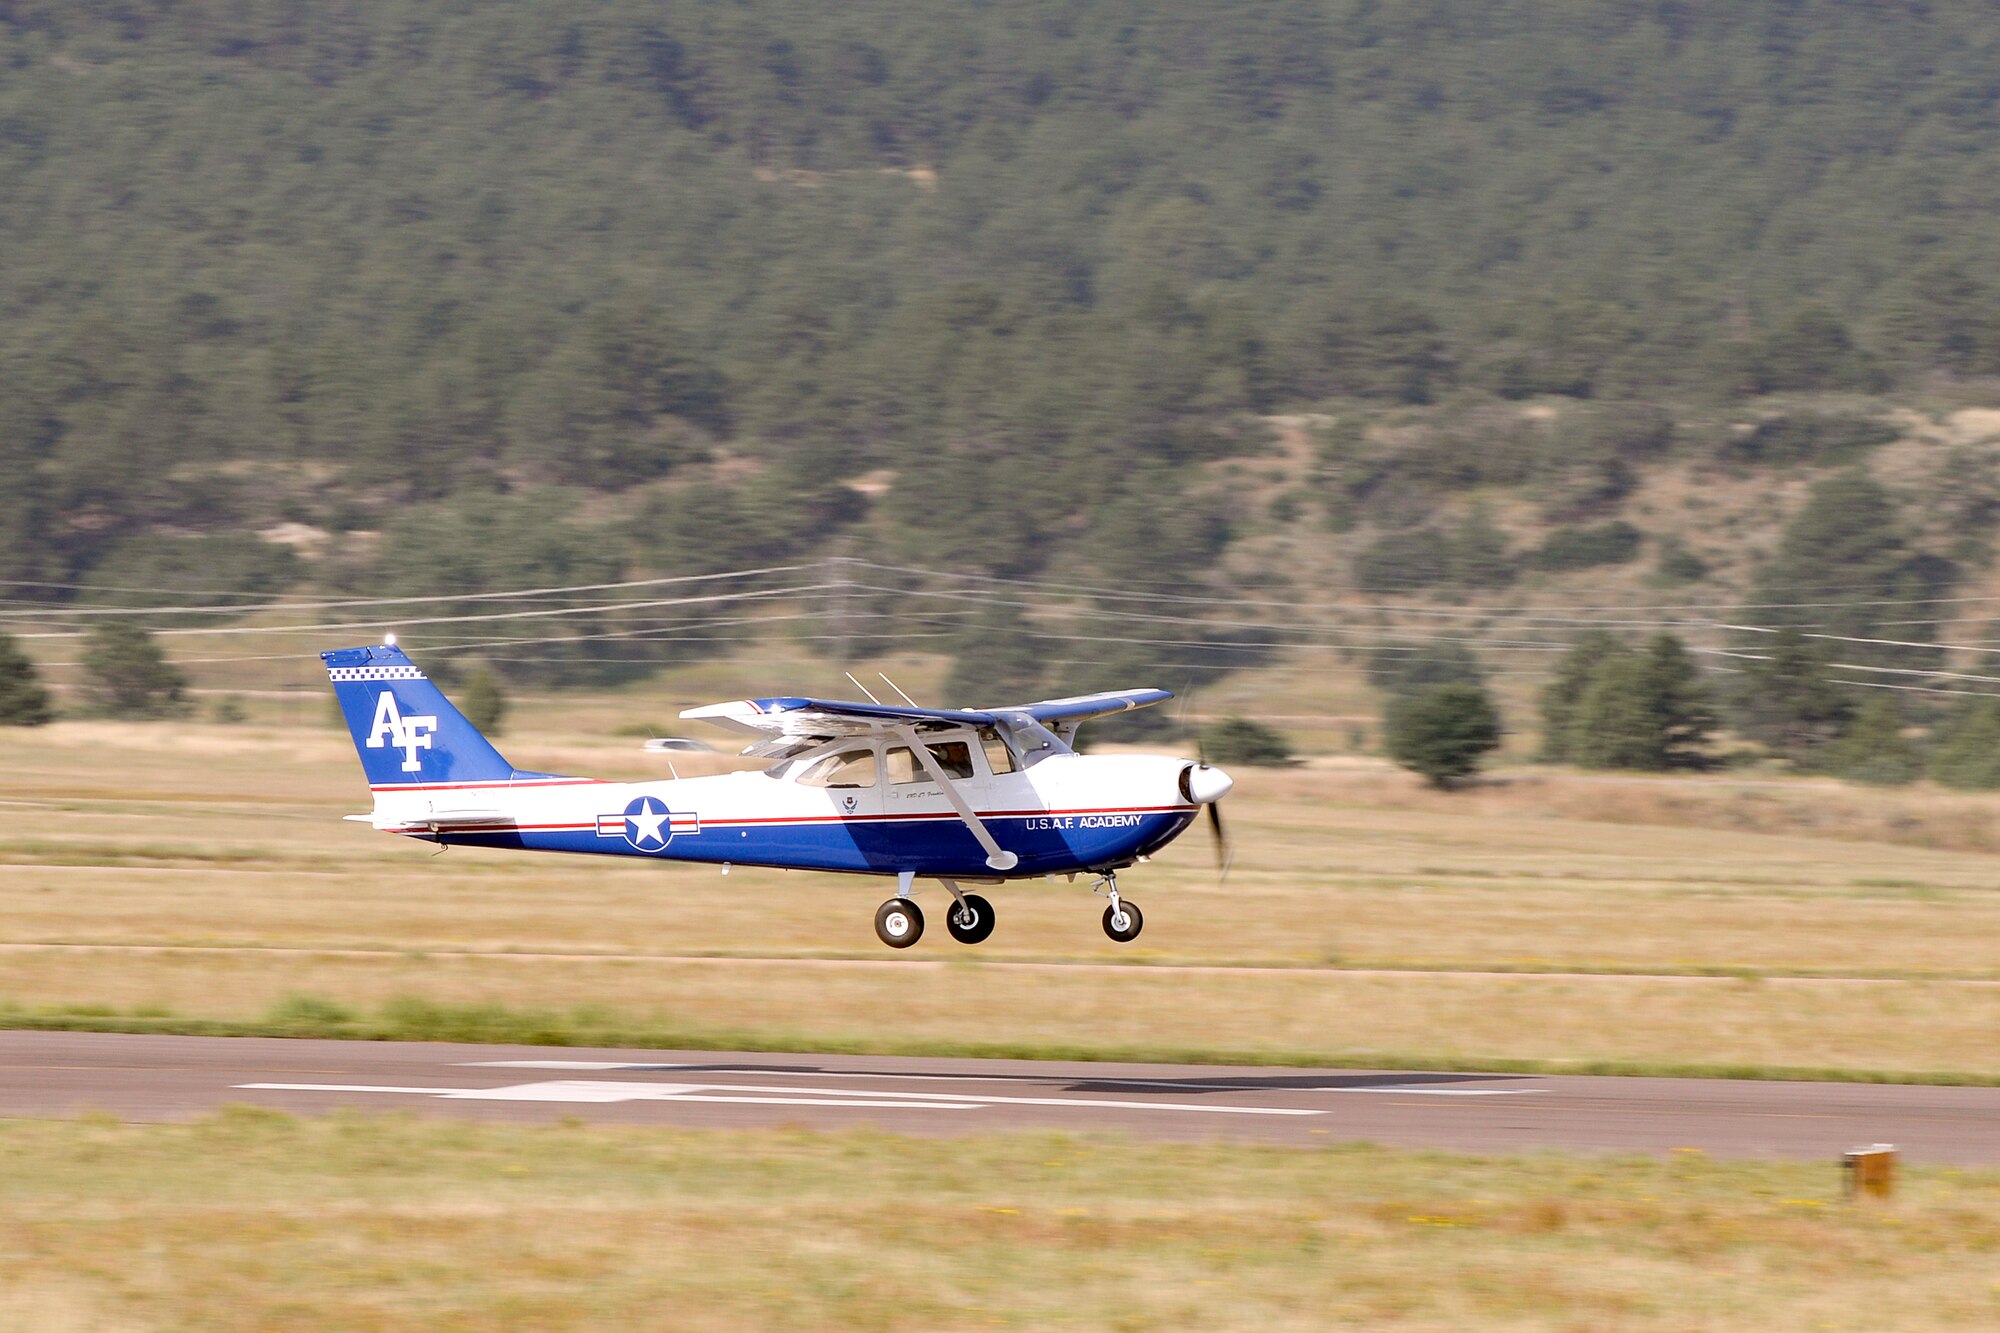 A T-41 takes off at the U.S. Air Force Academy airfield August 25, 2015. Original Tuskegee Airman Franklin Macon was riding inside in what was possibly his last ride. Macon took his first powered flight at the airfield when it was only a dirt strip. (U.S. Air Force photo/Mike Kaplan)